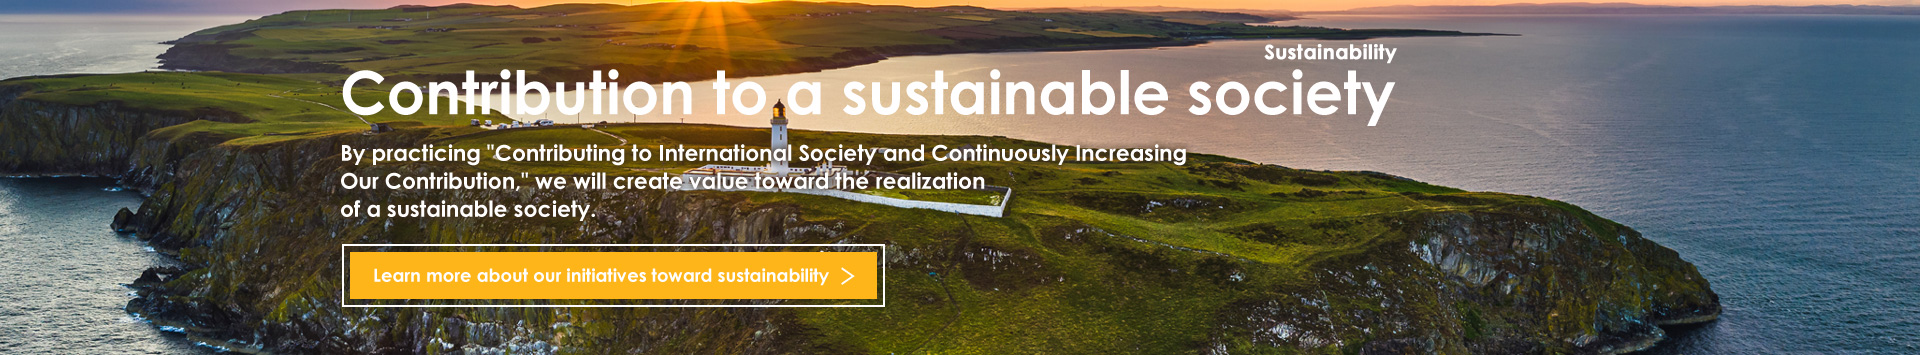 Contribution to a sustainable society